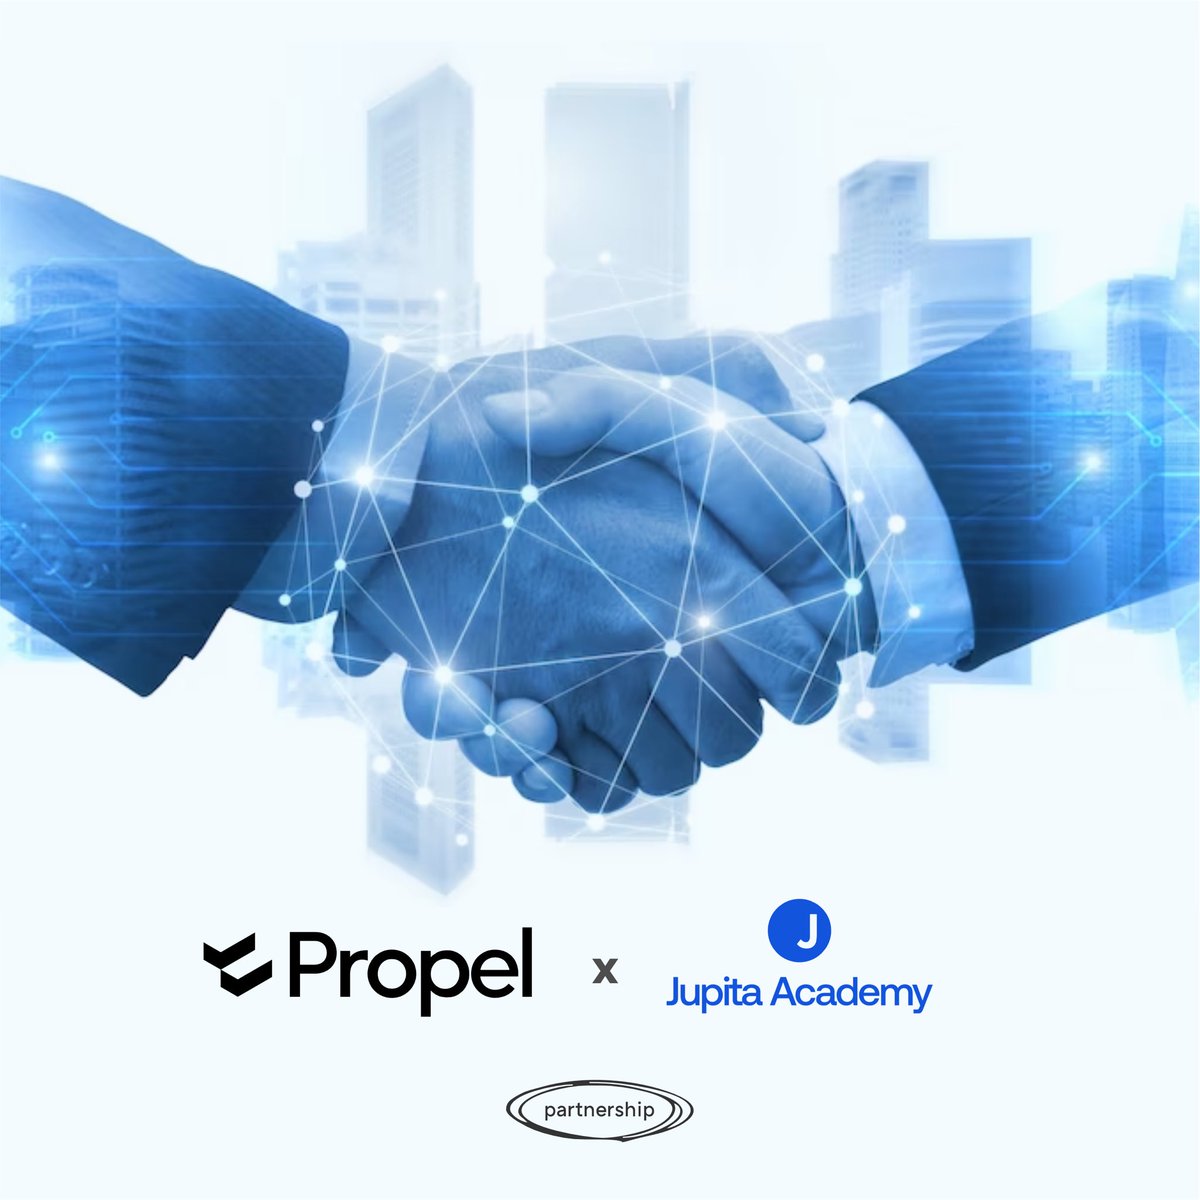 We are super thrilled to unveil an exciting partnership with @WithPropel 🤝

Propel is an innovative & forward-thinking company that is dedicated to igniting innovation & unlocking untapped potential.

#partnershipannouncement #jupitaacademy #propel #TechisHiring